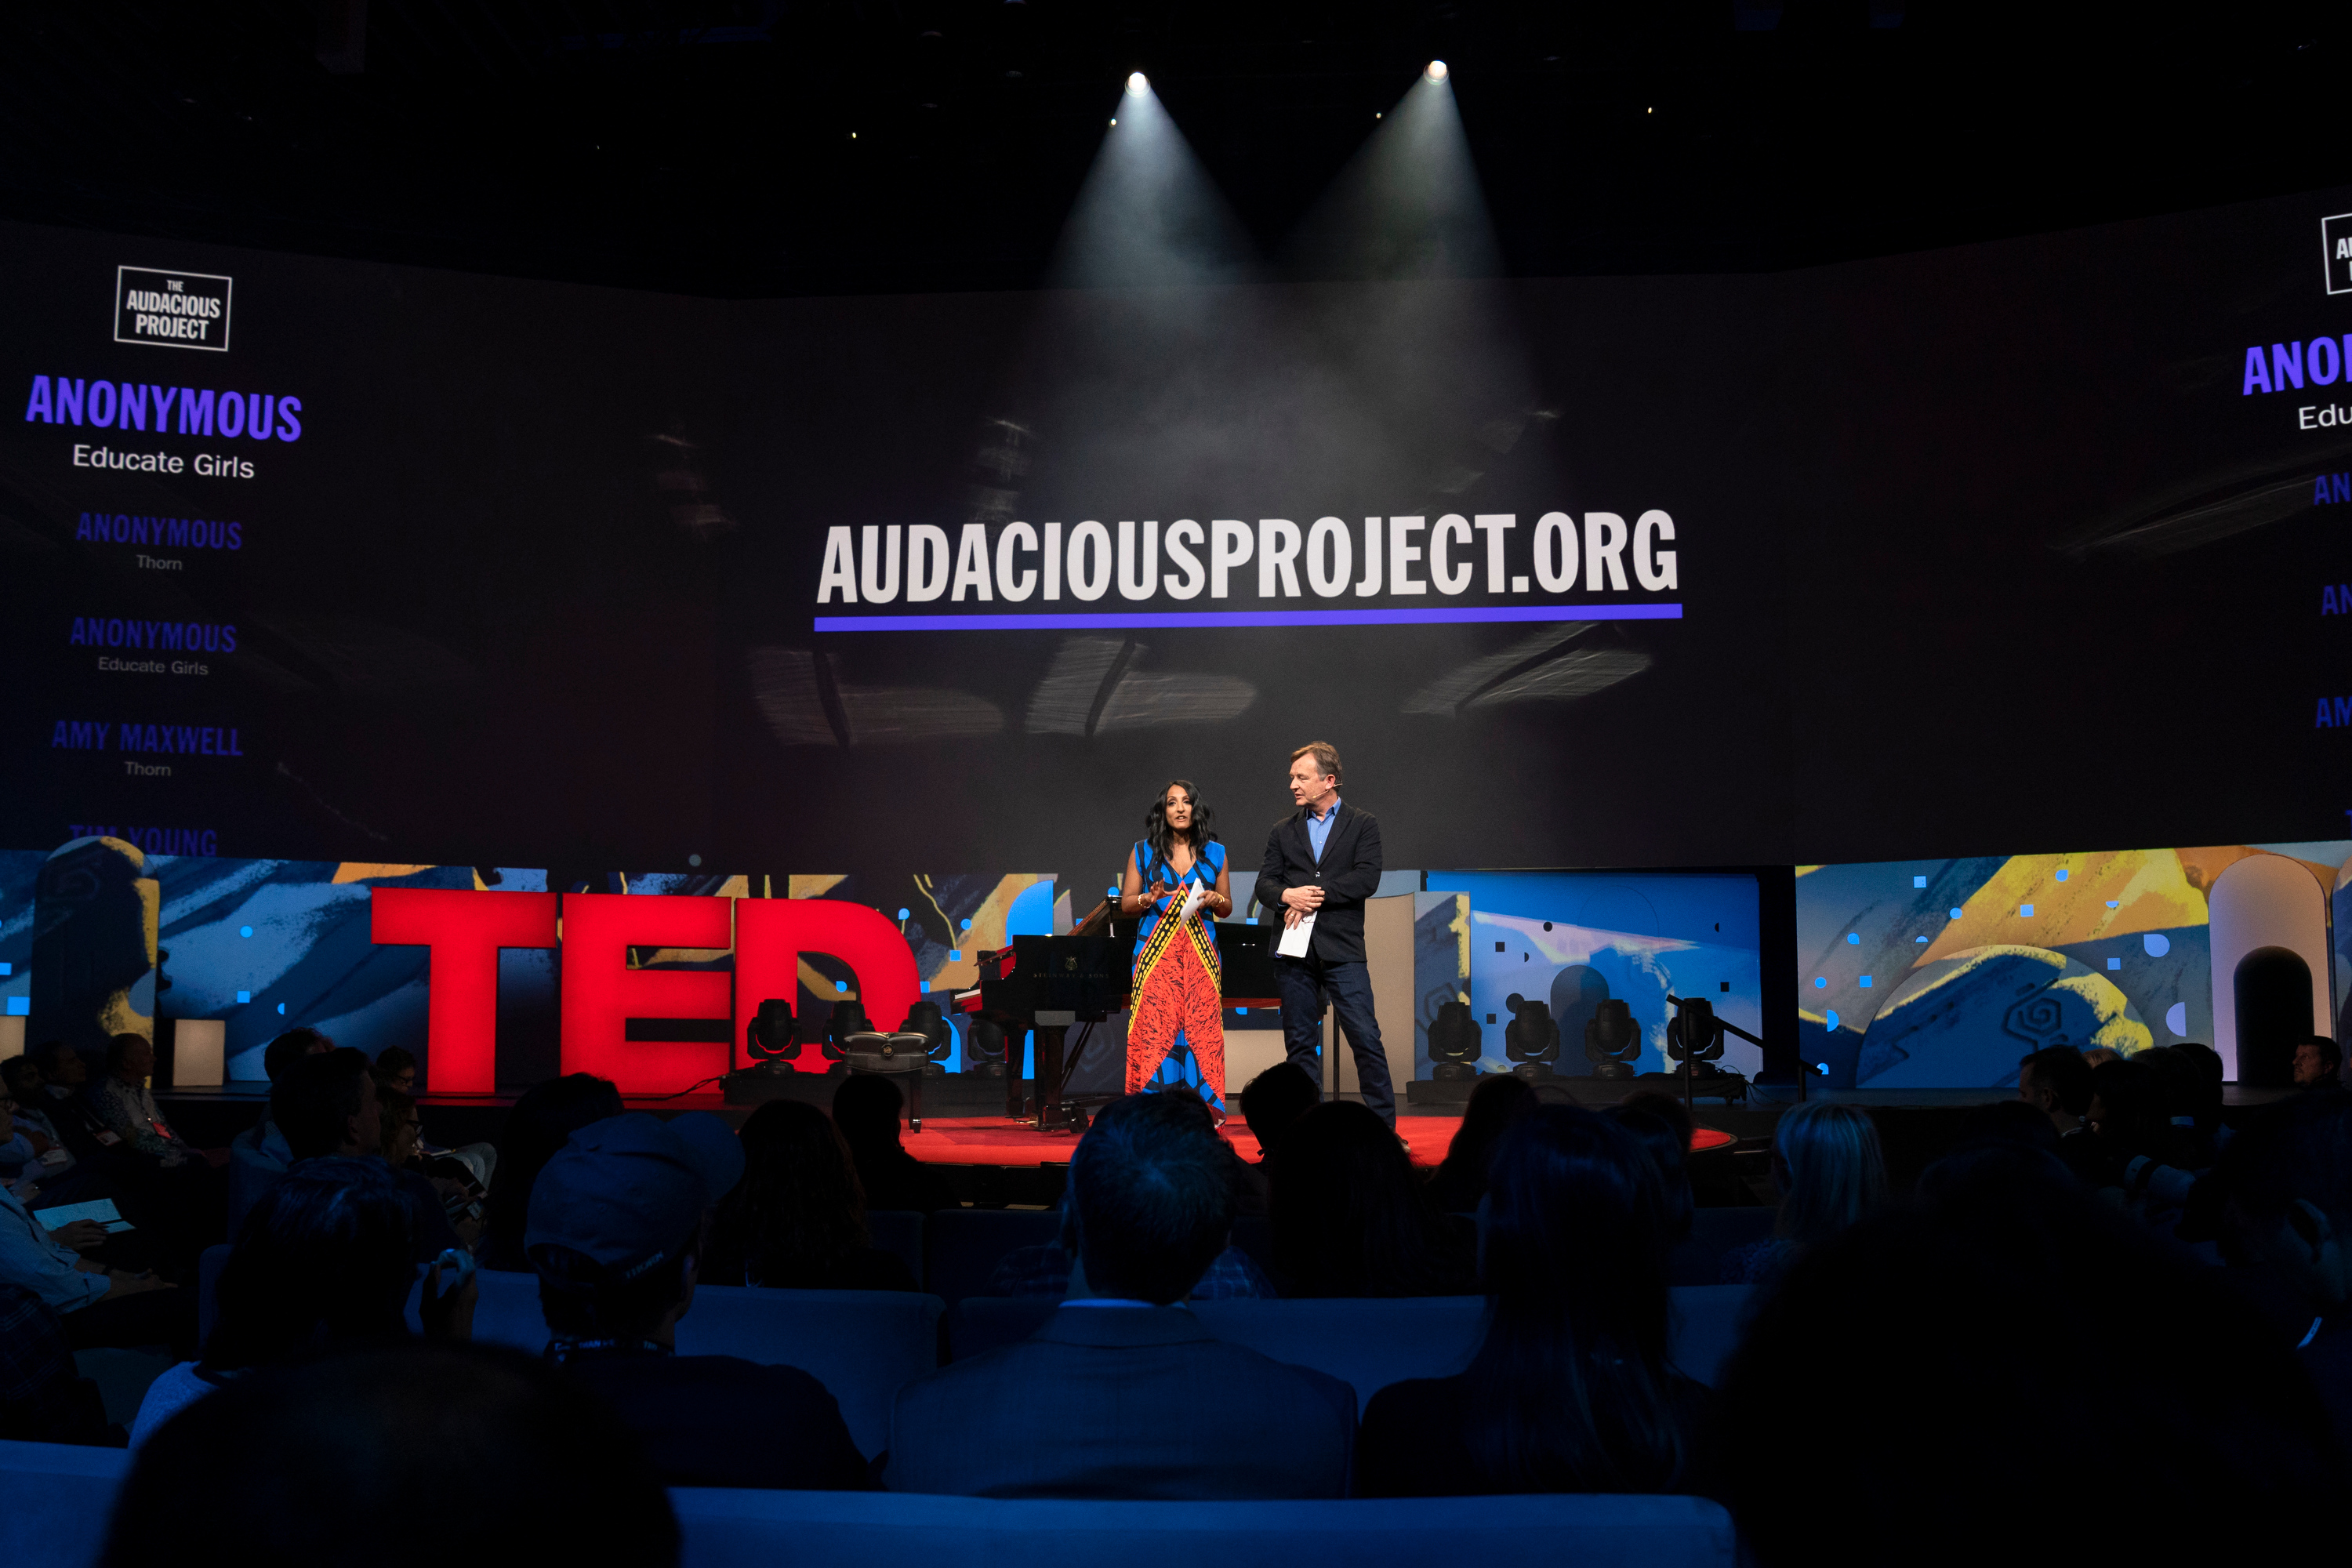 Audacity: 8 big, bold ideas for global change unveiled in Session 4 of
TED2019